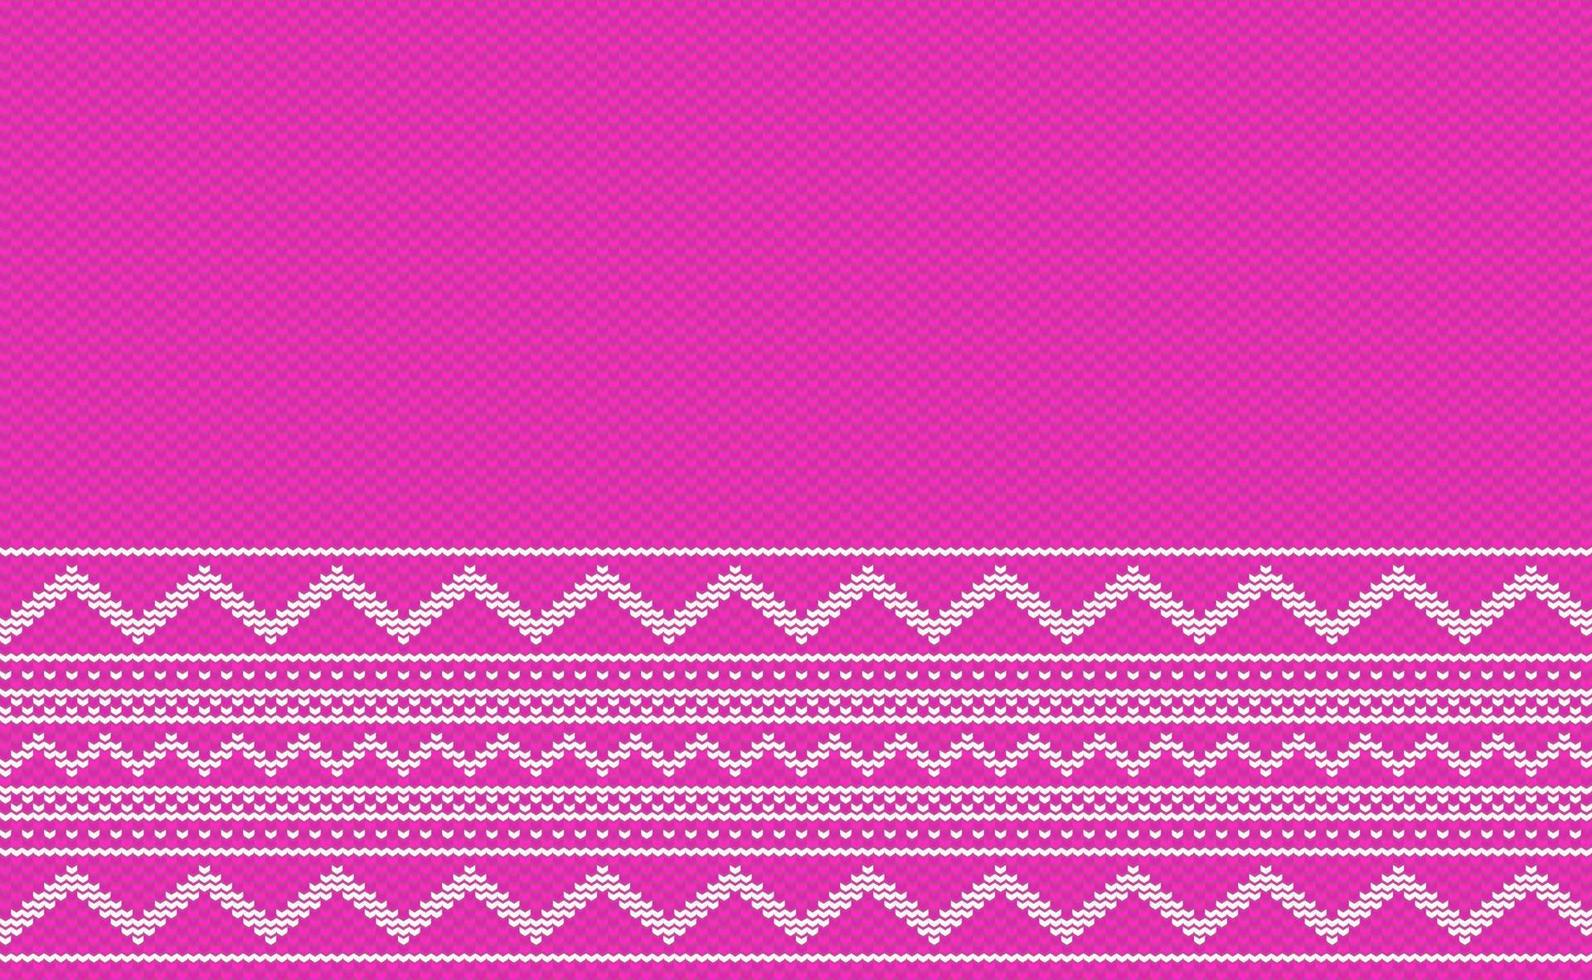 Sweater knitting pattern, Vector ethnic embroidery knitting background, Knitted decorative square style